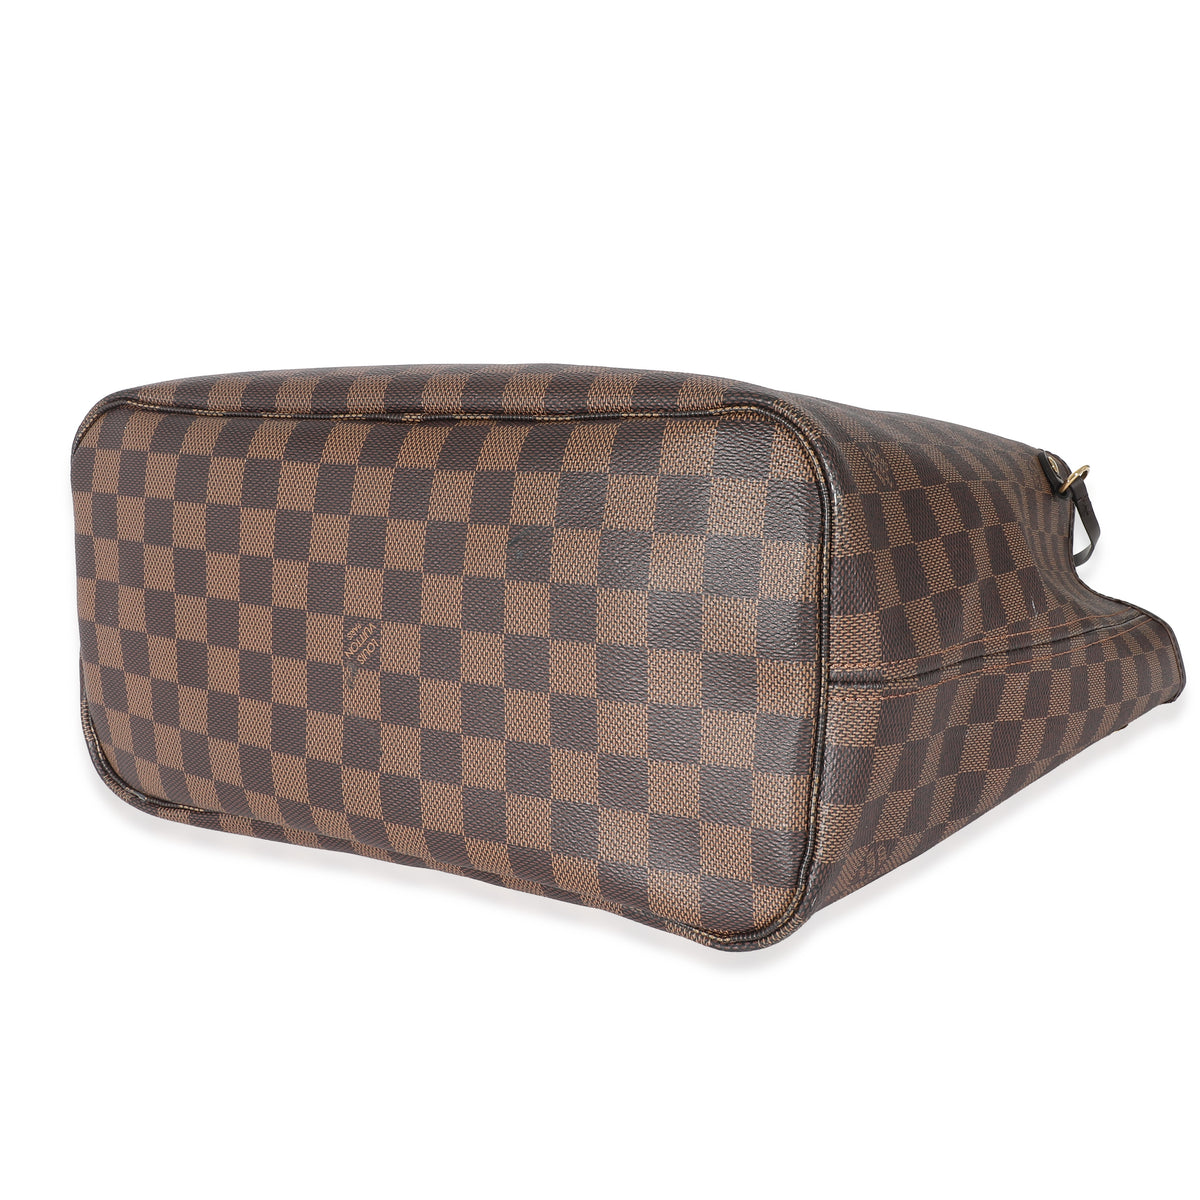 Louis-Vuitton-Damier-Ebene-Neverfull-MM-Tote-Bag-N41358 – dct-ep_vintage  luxury Store